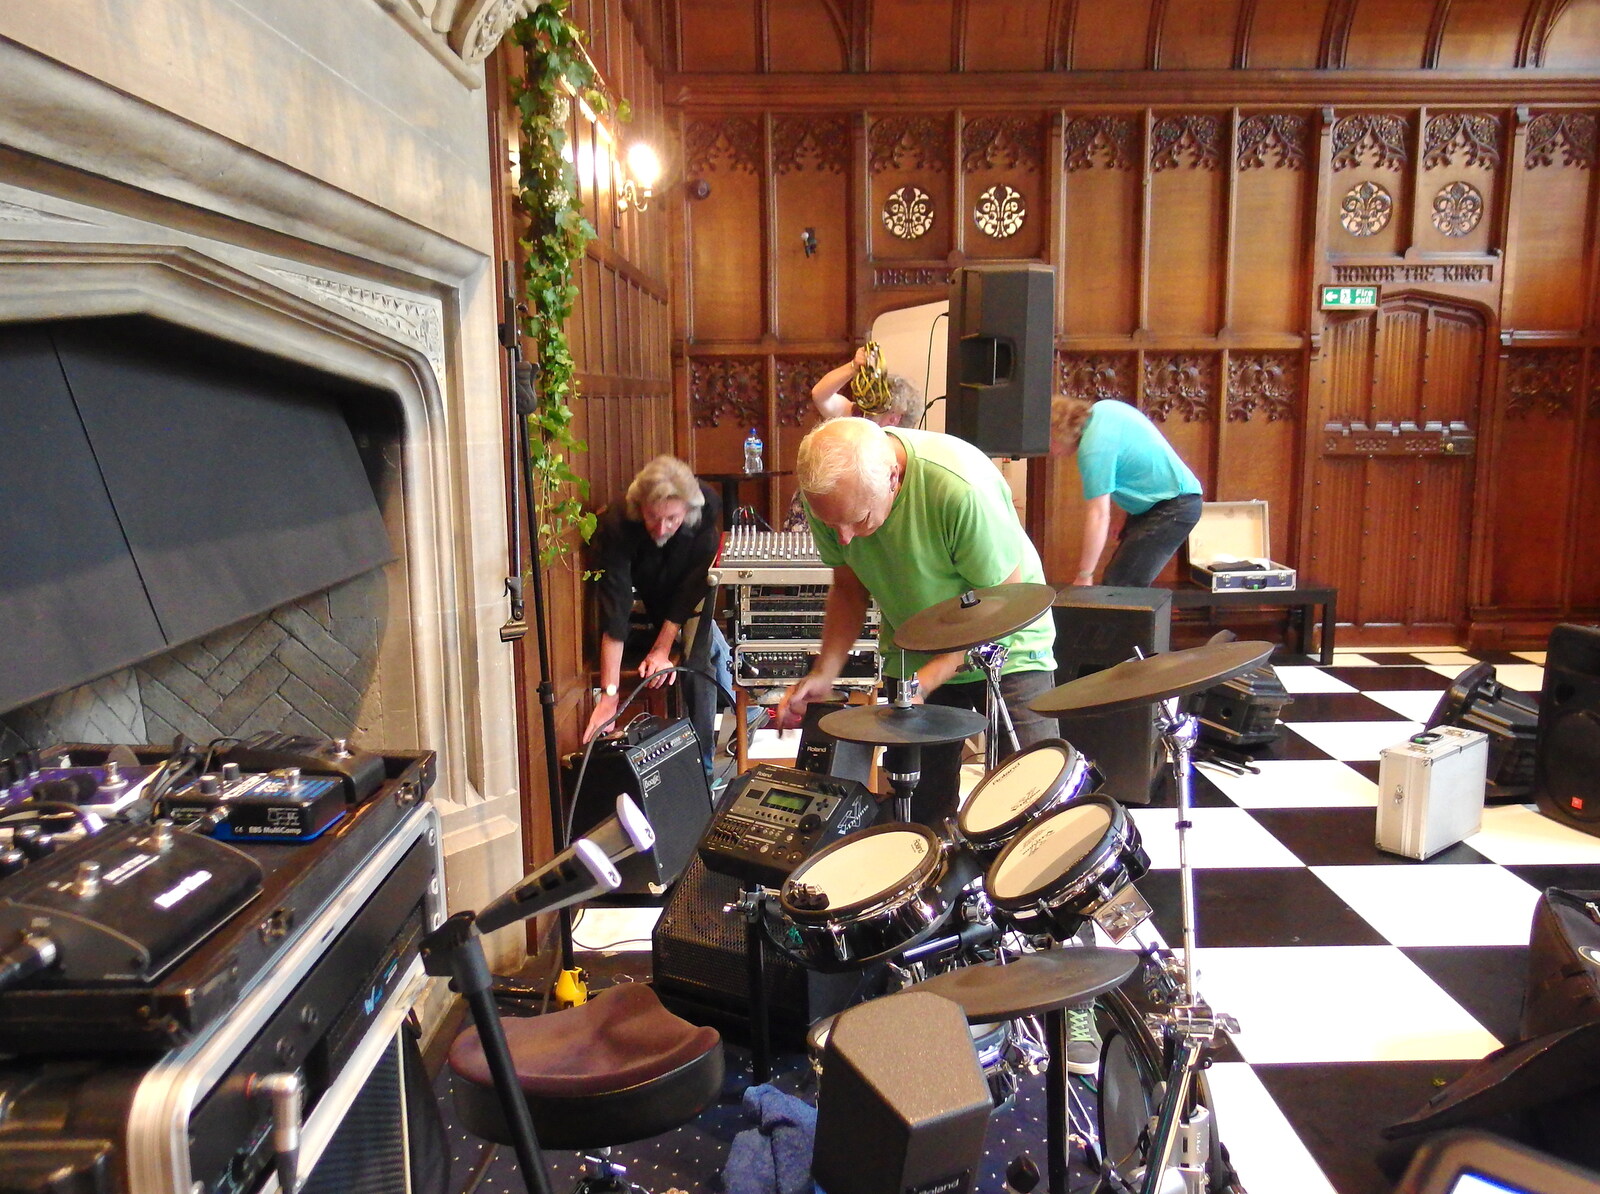 Henry sets his 'electro' kit up from The BBs at Hengrave Hall, Hengrave, Suffolk - 18th August 2013